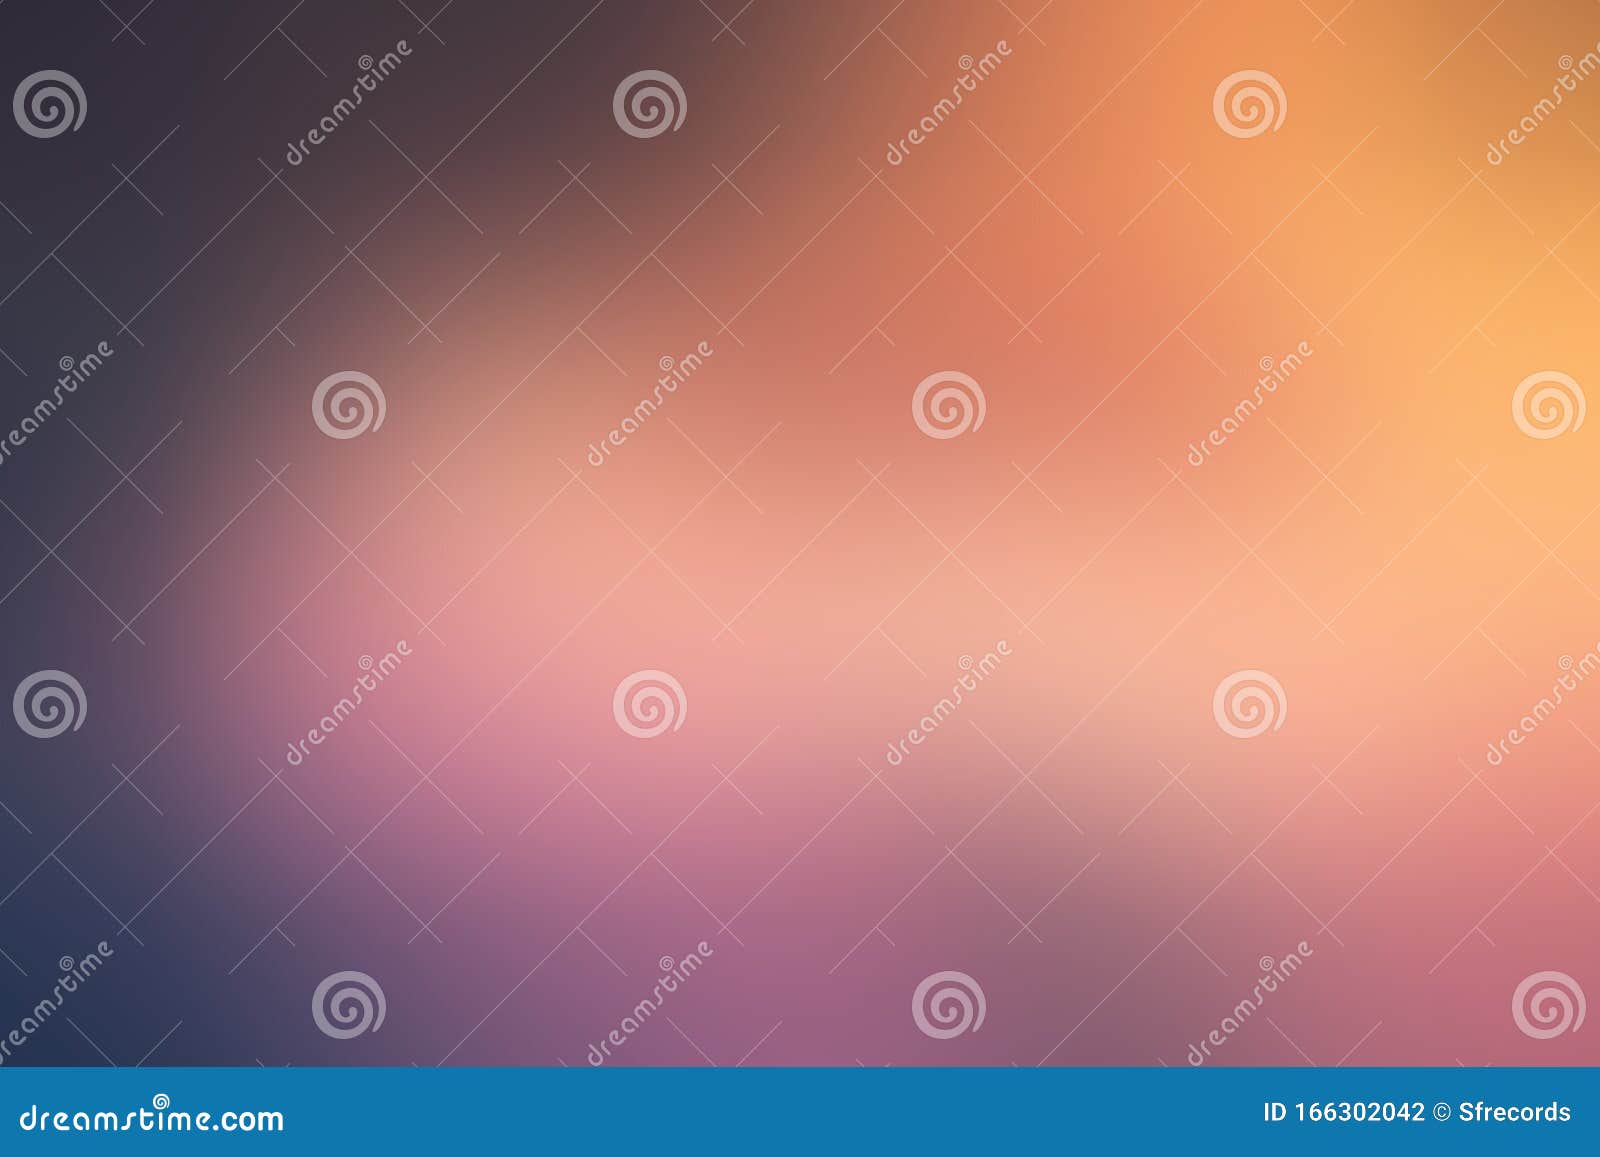 Gentle Color Blurred Gradient Background Stock Illustration - Illustration  of abstract, soft: 166302042